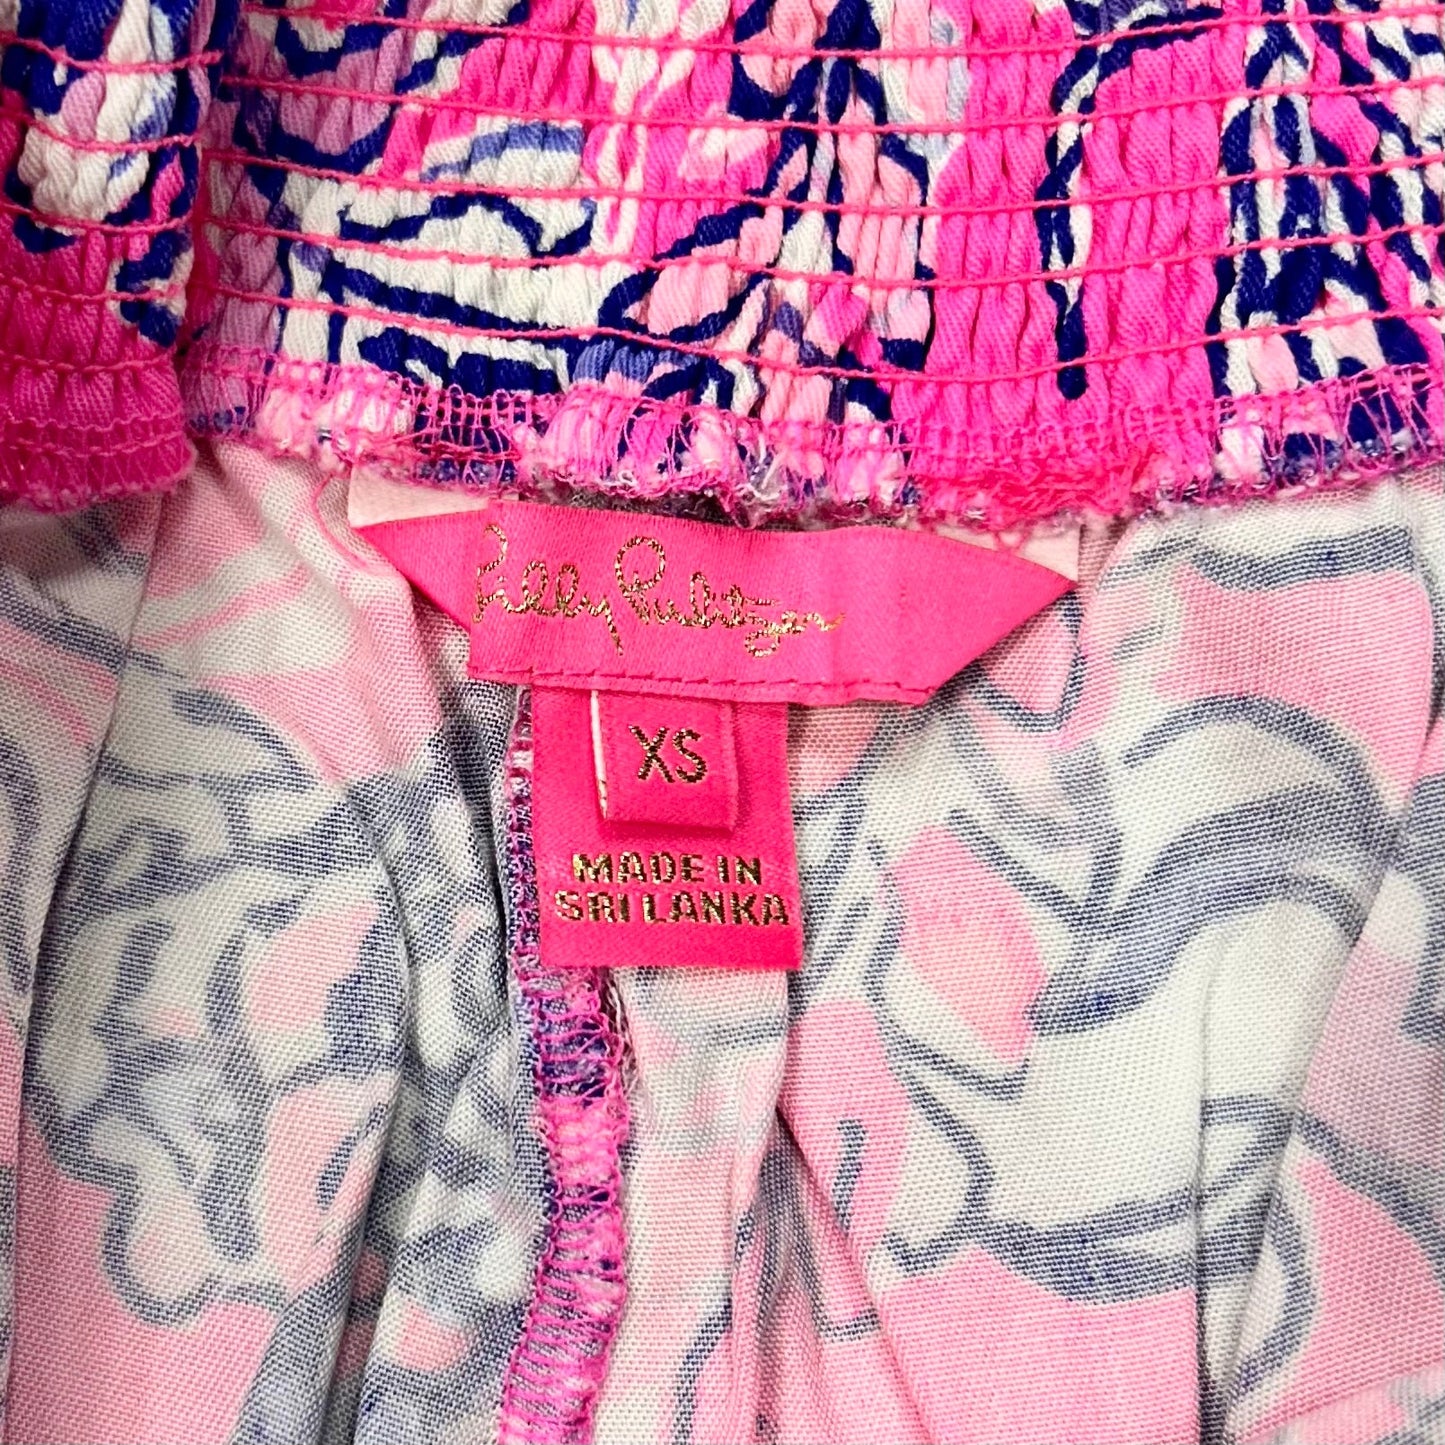 Pink Blue Shorts Designer By Lilly Pulitzer, Size: Xs